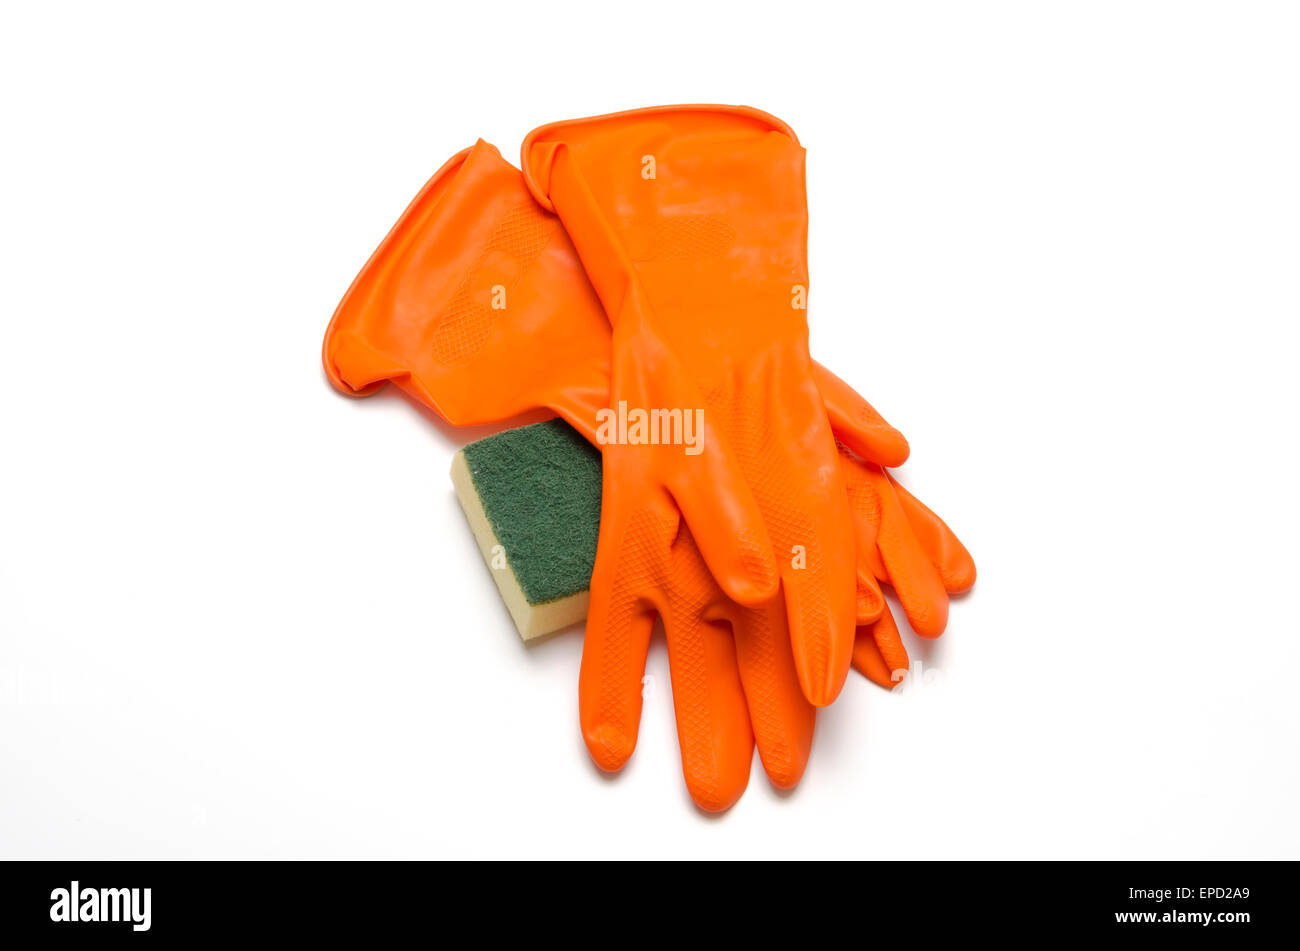 cleaning sponge and glove on a white background Stock Photo